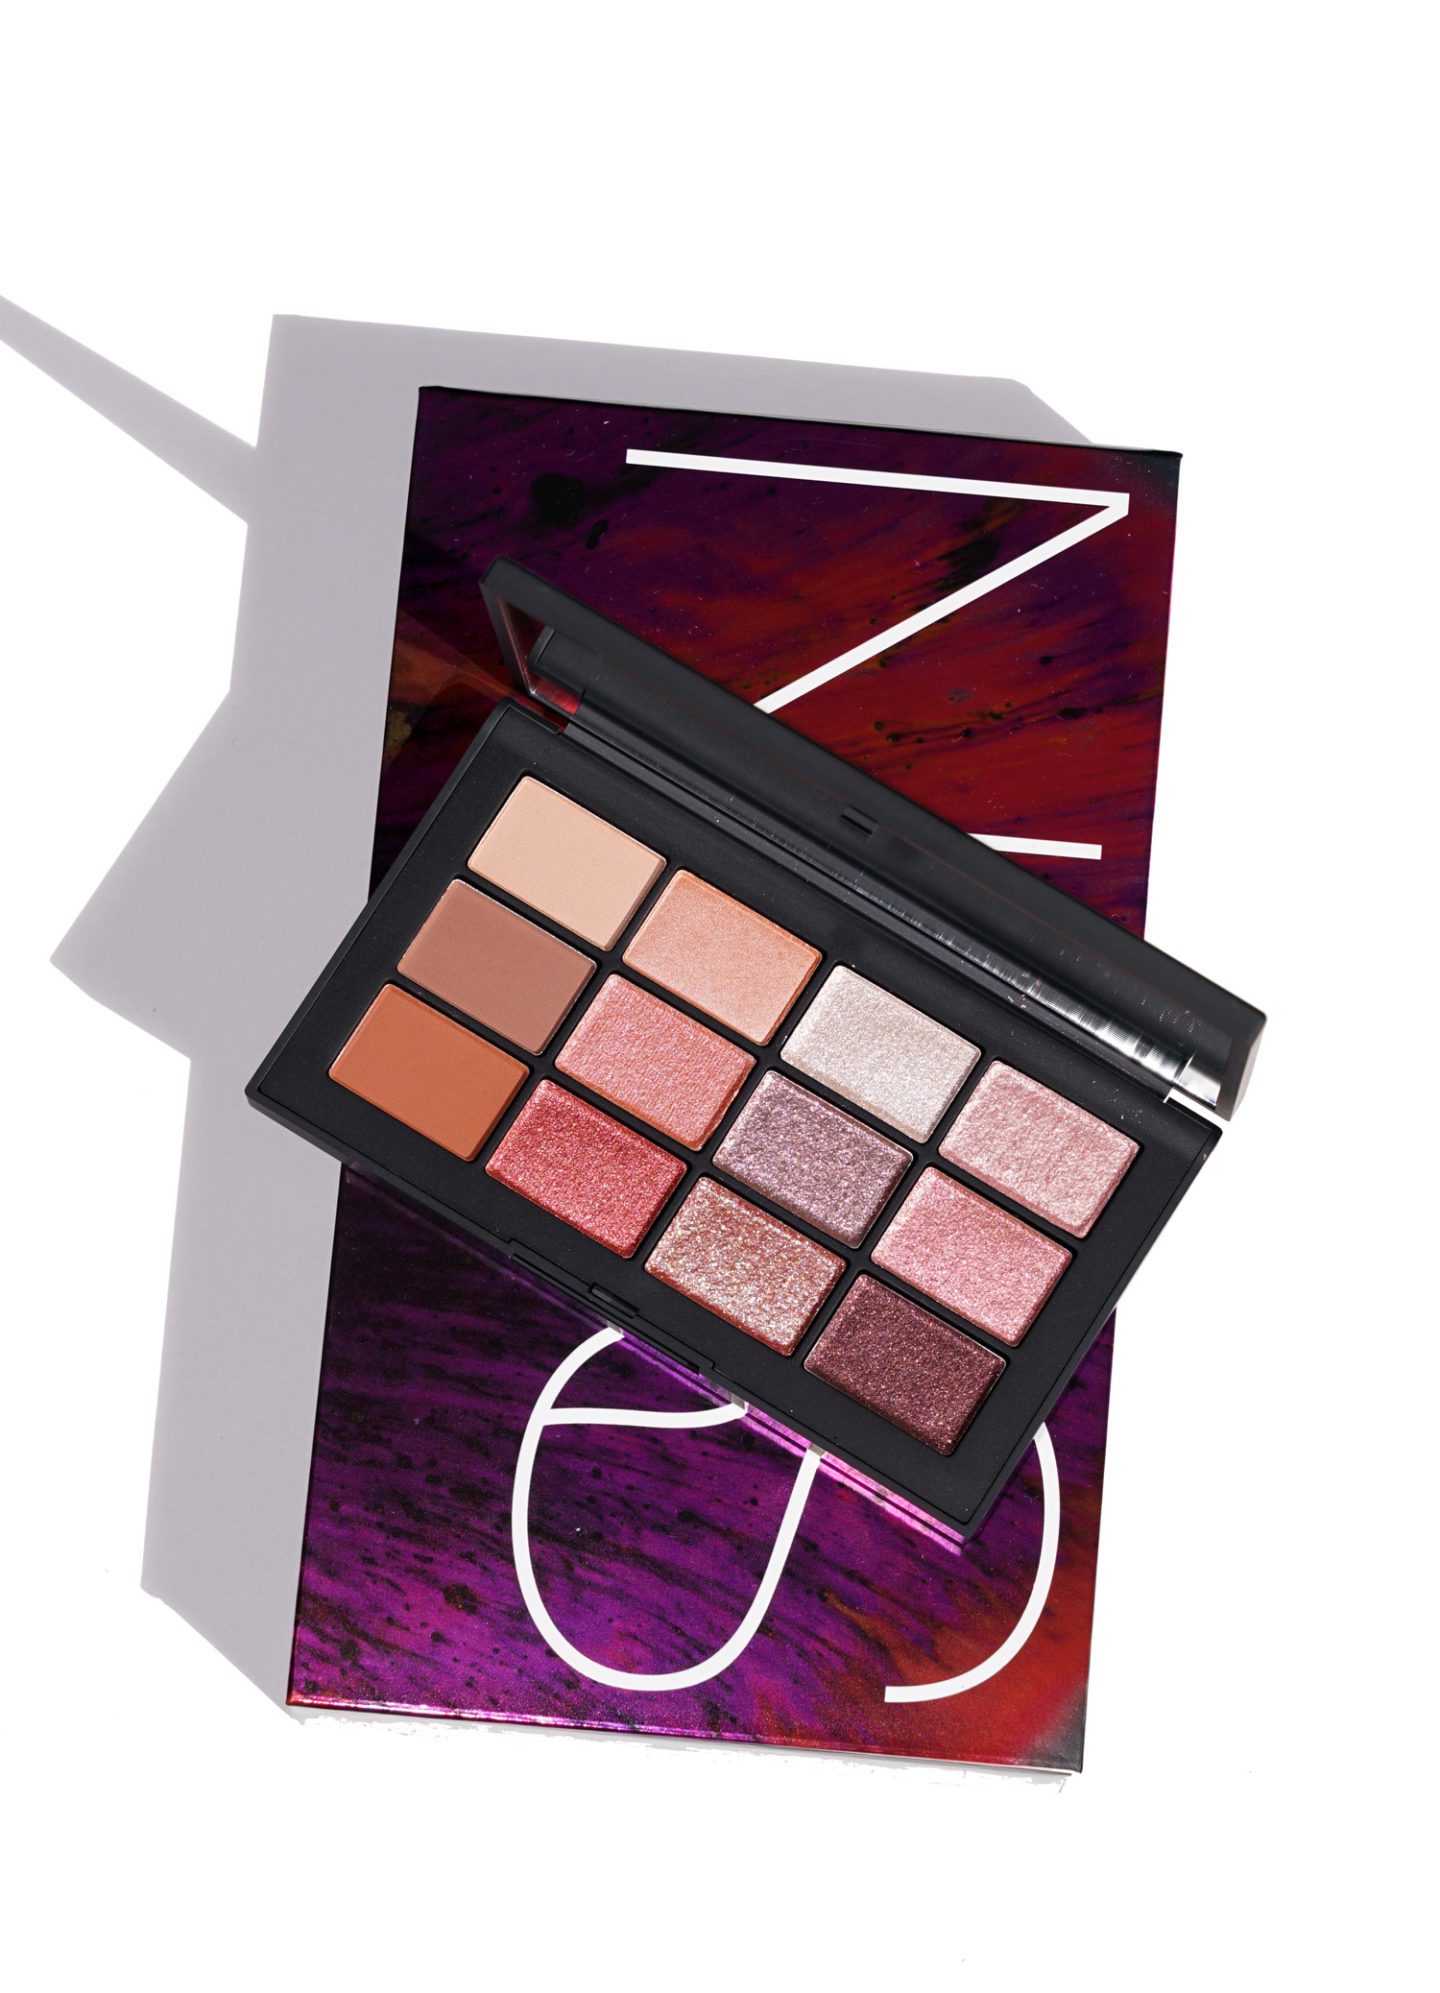 NARS Ignited Eyeshadow Palette review + swatches | The Beauty Look Book